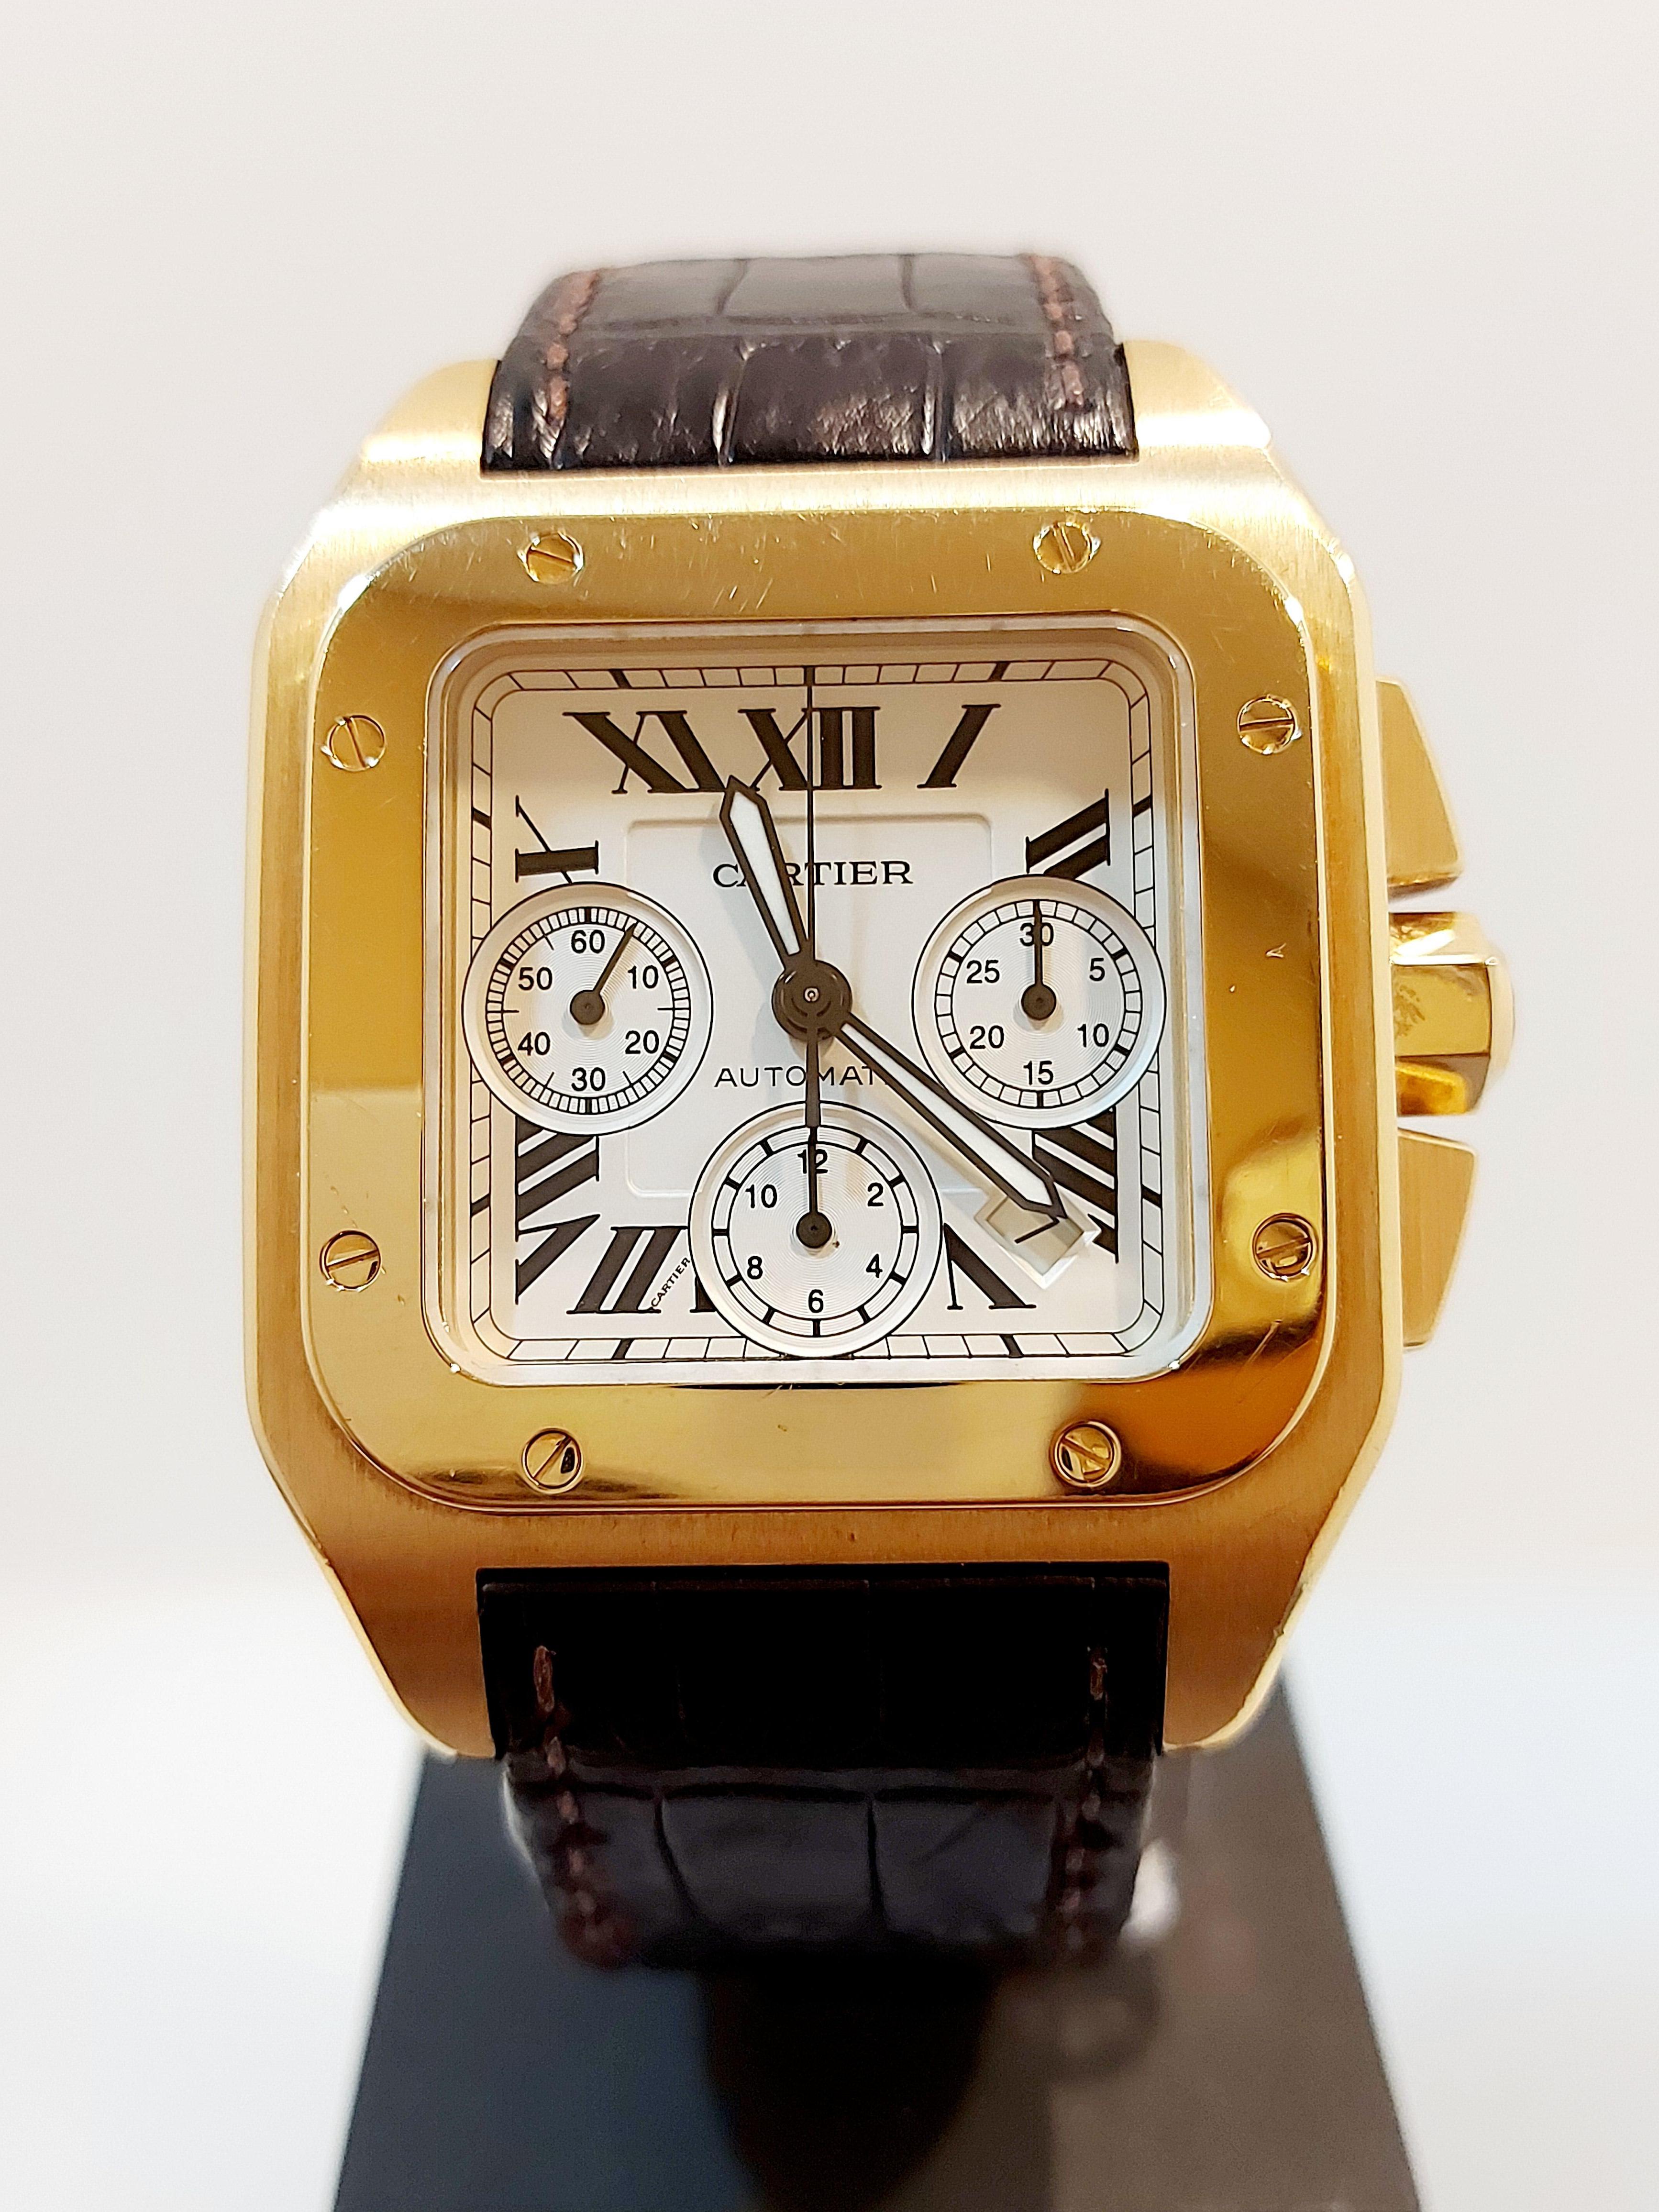 Cartier Santos 100 XL automatic watch 18ct gold with chronograph and date on a brown croc strap with an 18ct duployment 
buckle, model number W20096Y1. Original box and papers dated January 2006.